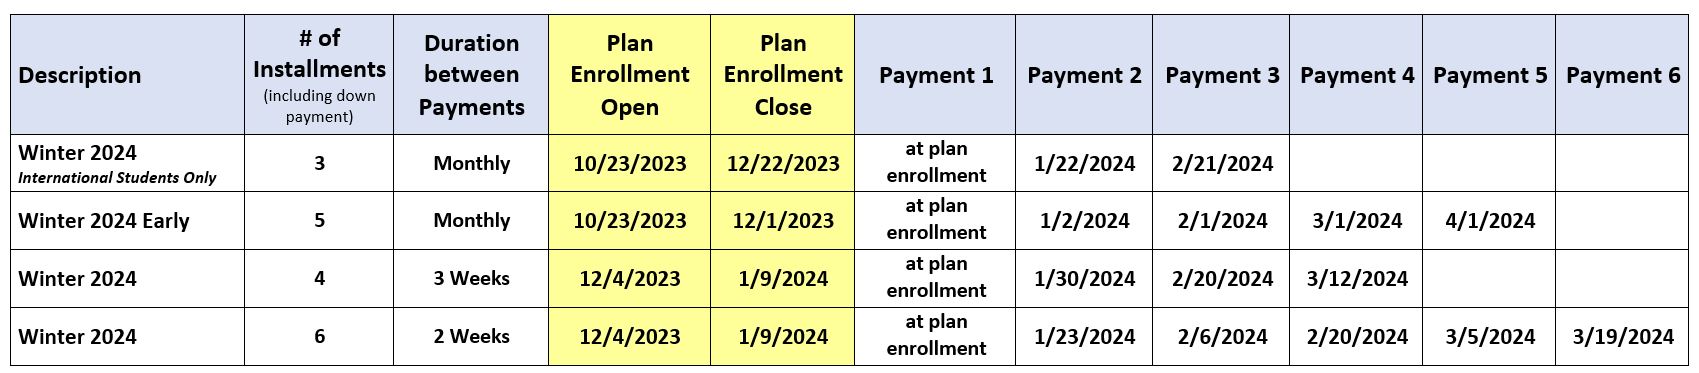 payment plan grid with deadlines